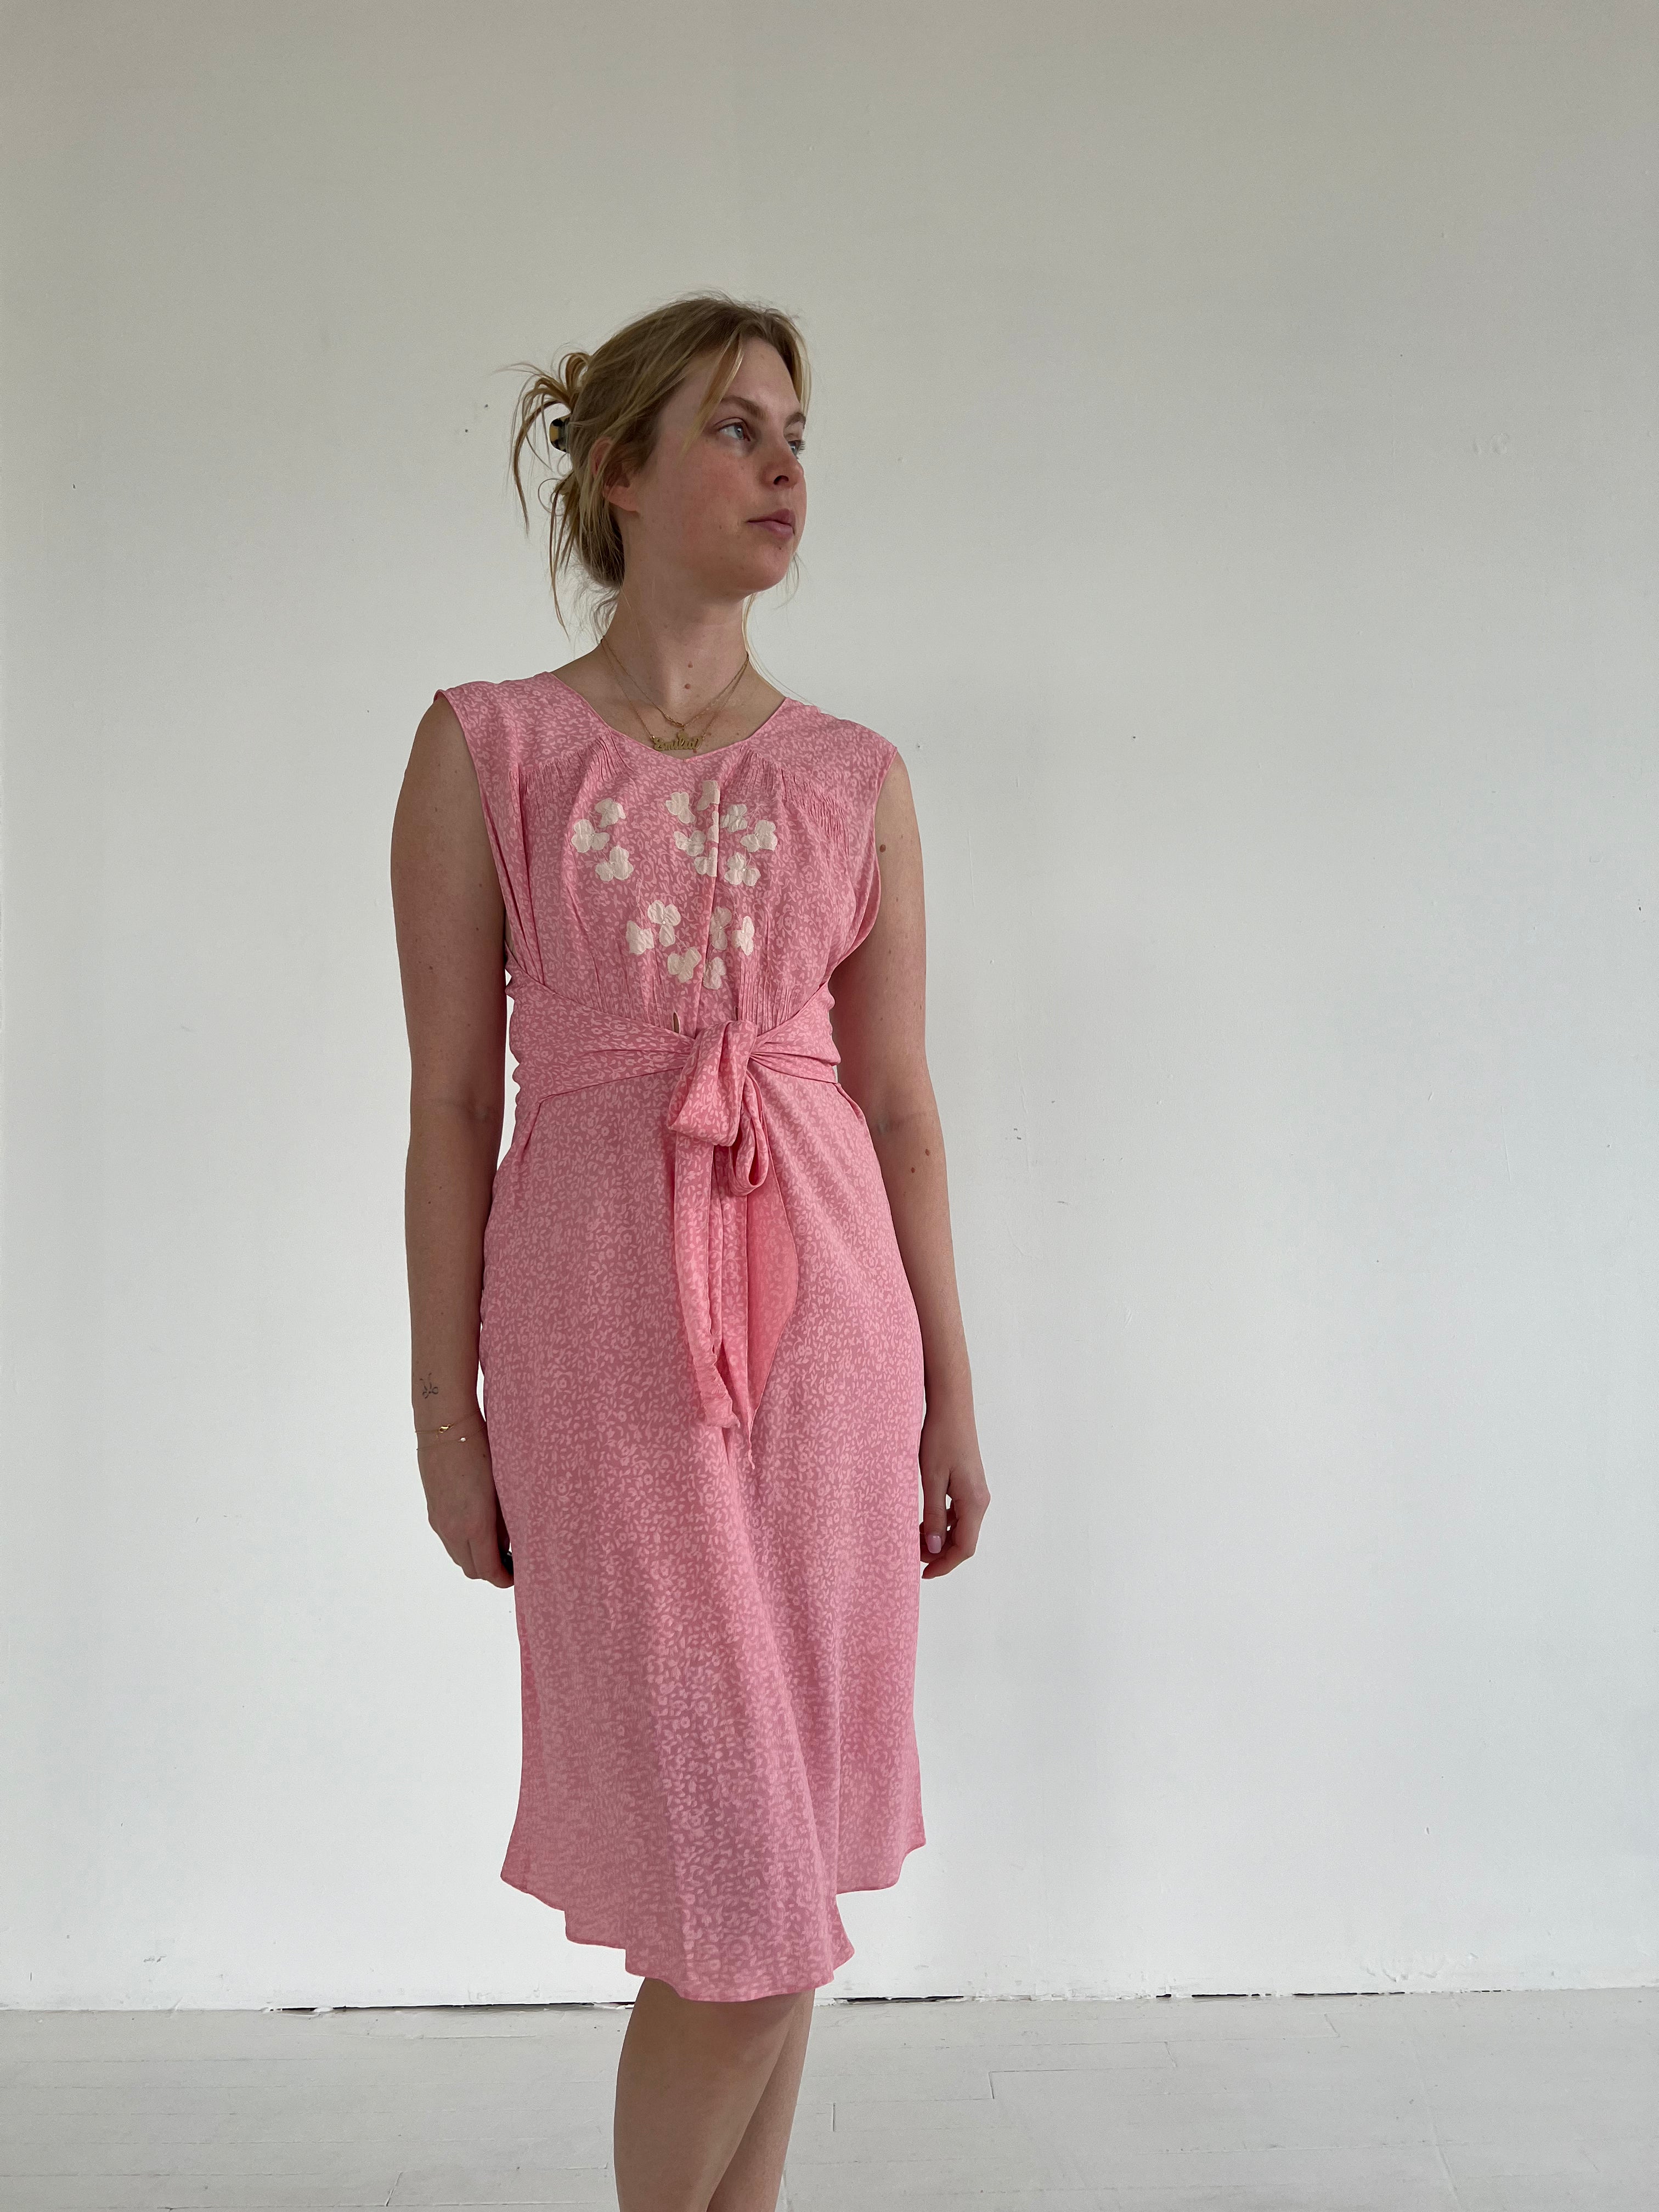 1930's Pink Silk Dress with Floral Print